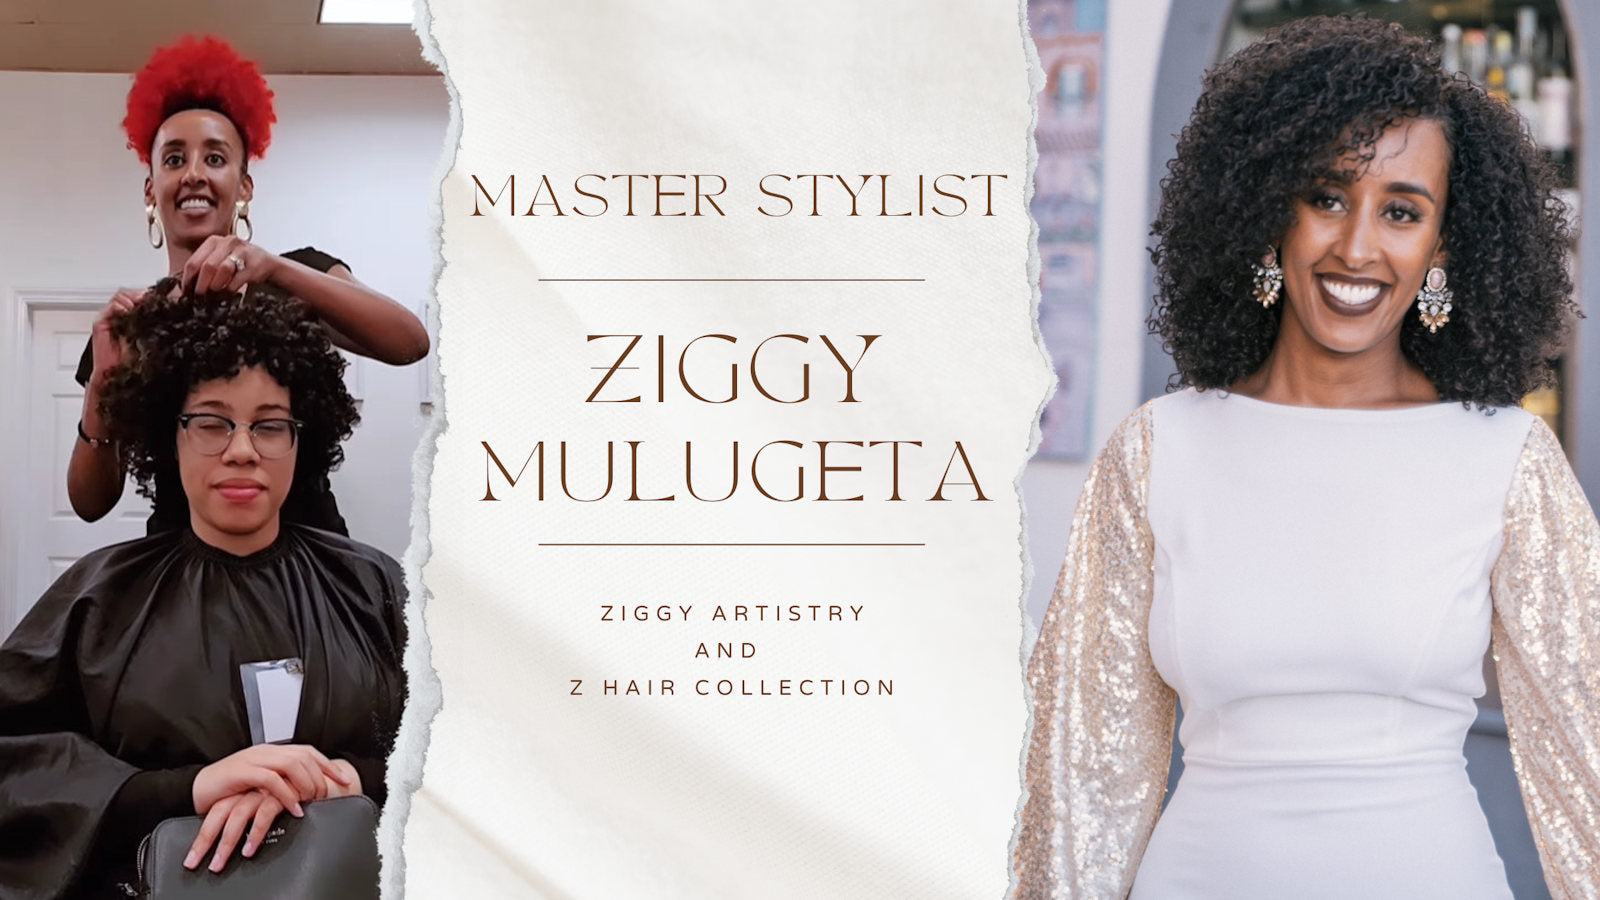 Zewditu (Ziggy) Mulugeta, founder and owner of Ziggy Artistry and Z Hair Collection